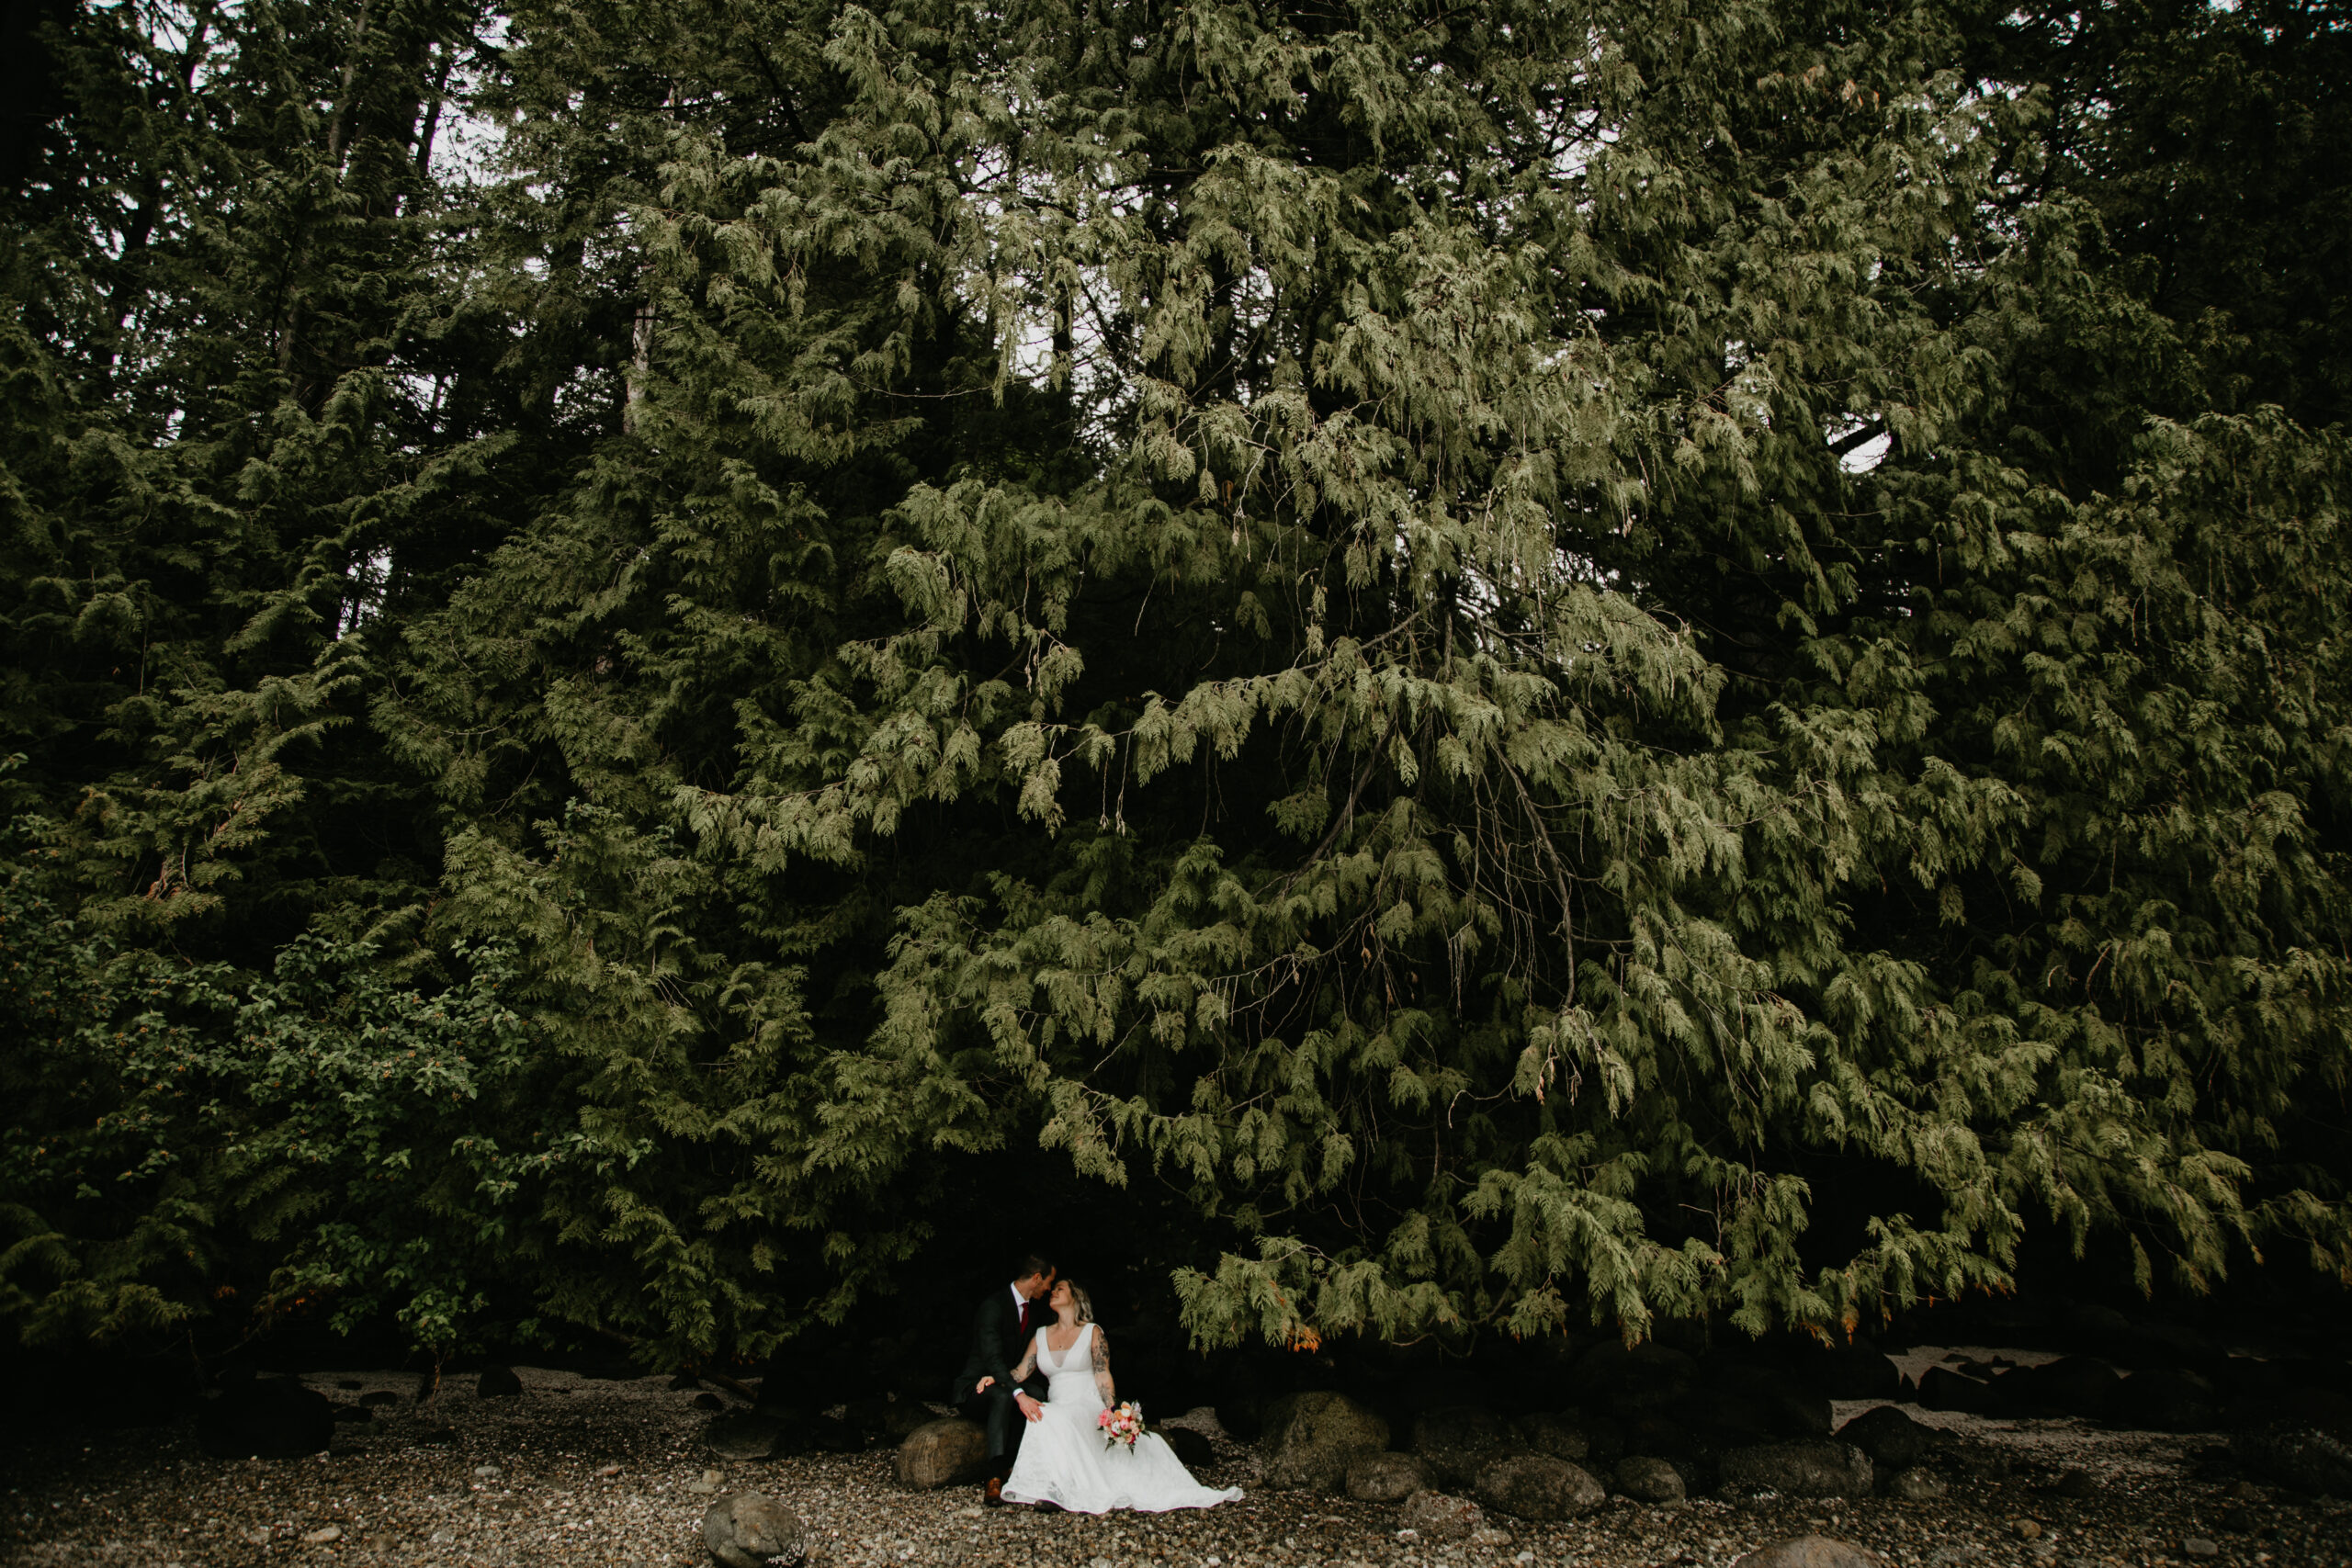 Wedding at Cates Park, North Vancouver